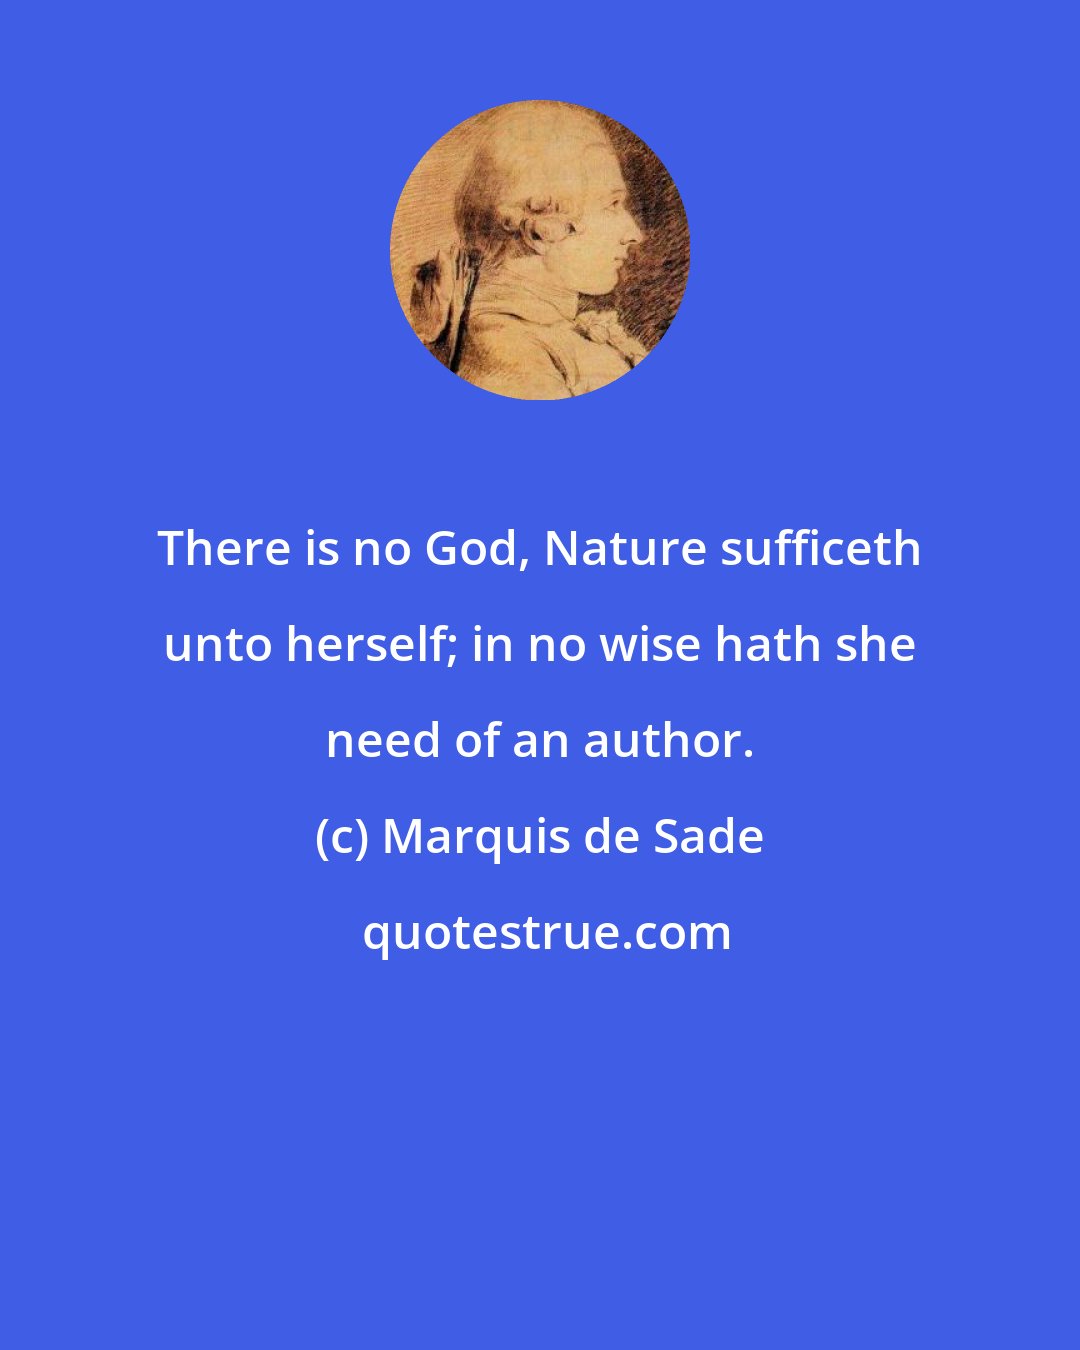 Marquis de Sade: There is no God, Nature sufficeth unto herself; in no wise hath she need of an author.